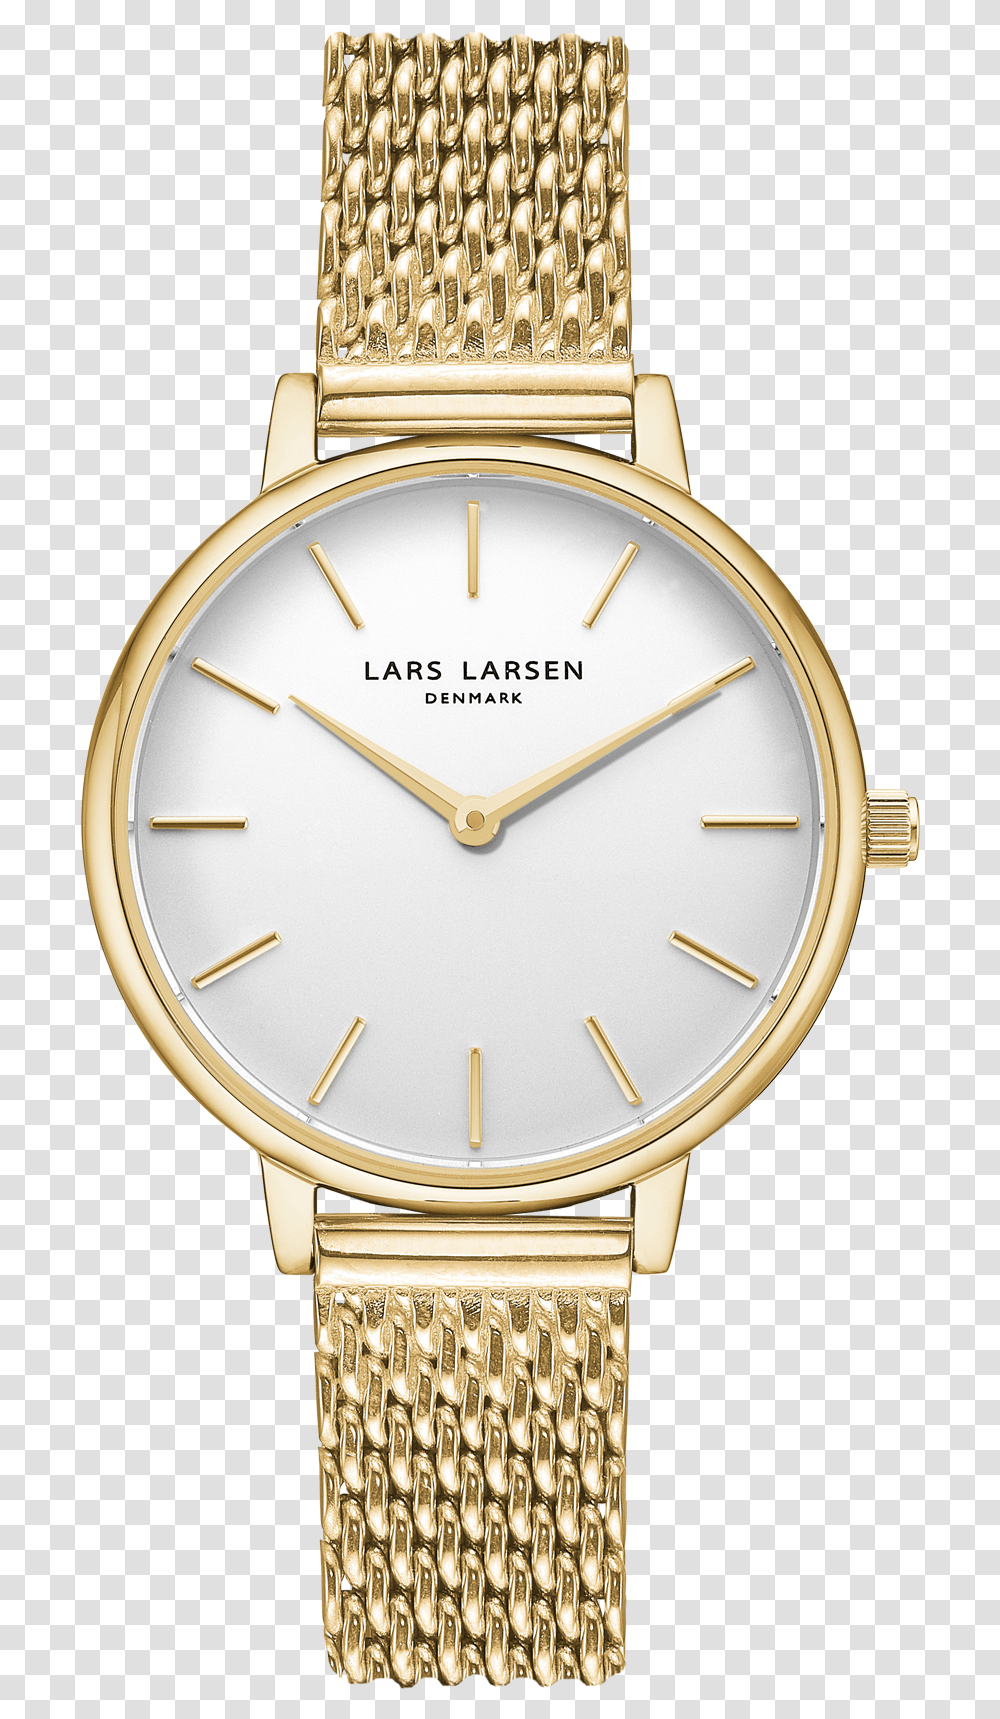 Download Gold Ladies Watch Image Solid, Wristwatch, Analog Clock, Clock Tower, Architecture Transparent Png